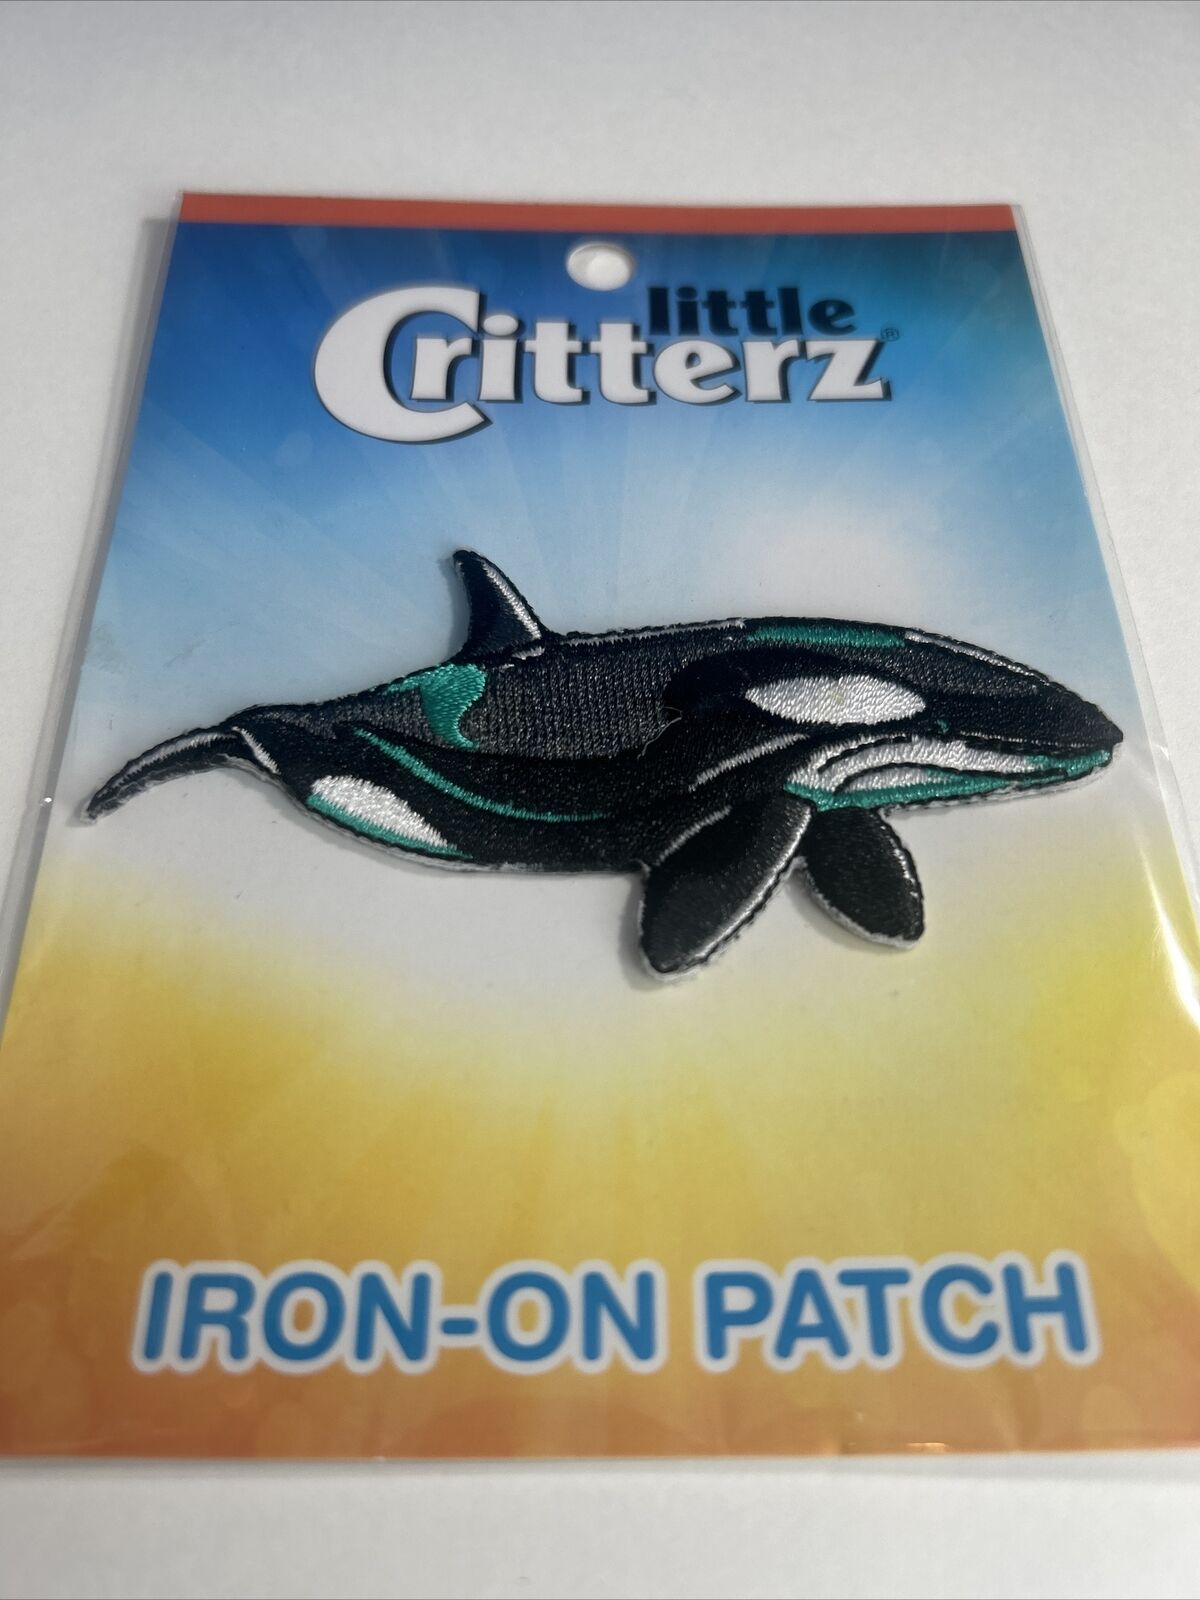 Orca Whale 3" Little Critterz Iron-on Patch  Craft Sewing Embelishment DIY NEW! Без бренда - фотография #2